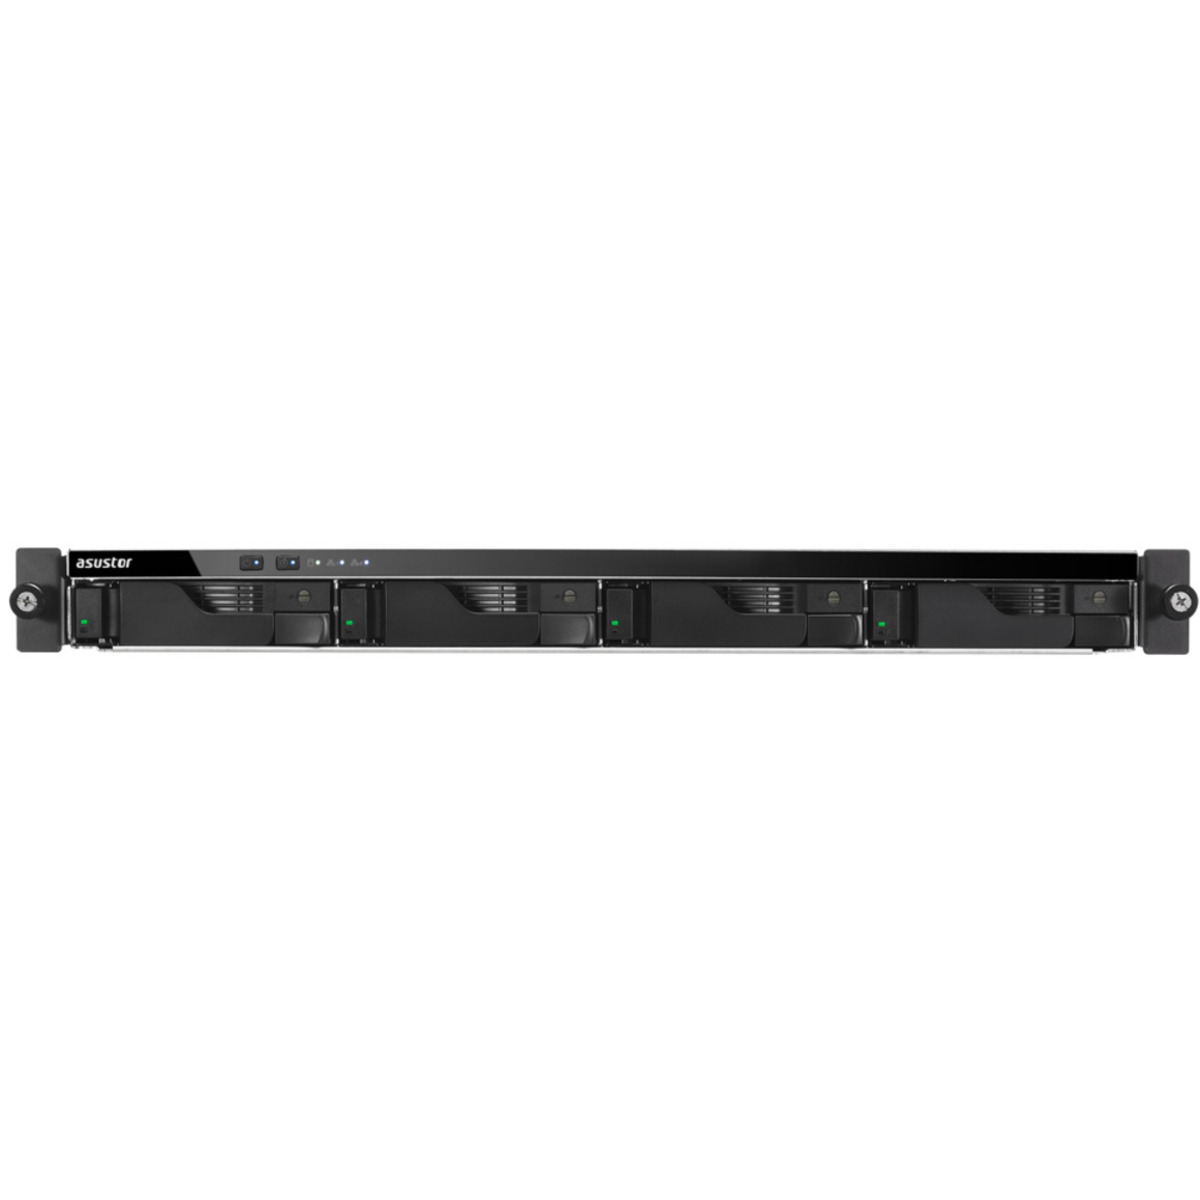 ASUSTOR LOCKERSTOR 4RD AS6504RD 64tb 4-Bay RackMount Multimedia / Power User / Business NAS - Network Attached Storage Device 4x16tb Seagate IronWolf ST16000VN001 3.5 7200rpm SATA 6Gb/s HDD NAS Class Drives Installed - Burn-In Tested - FREE RAM UPGRADE LOCKERSTOR 4RD AS6504RD